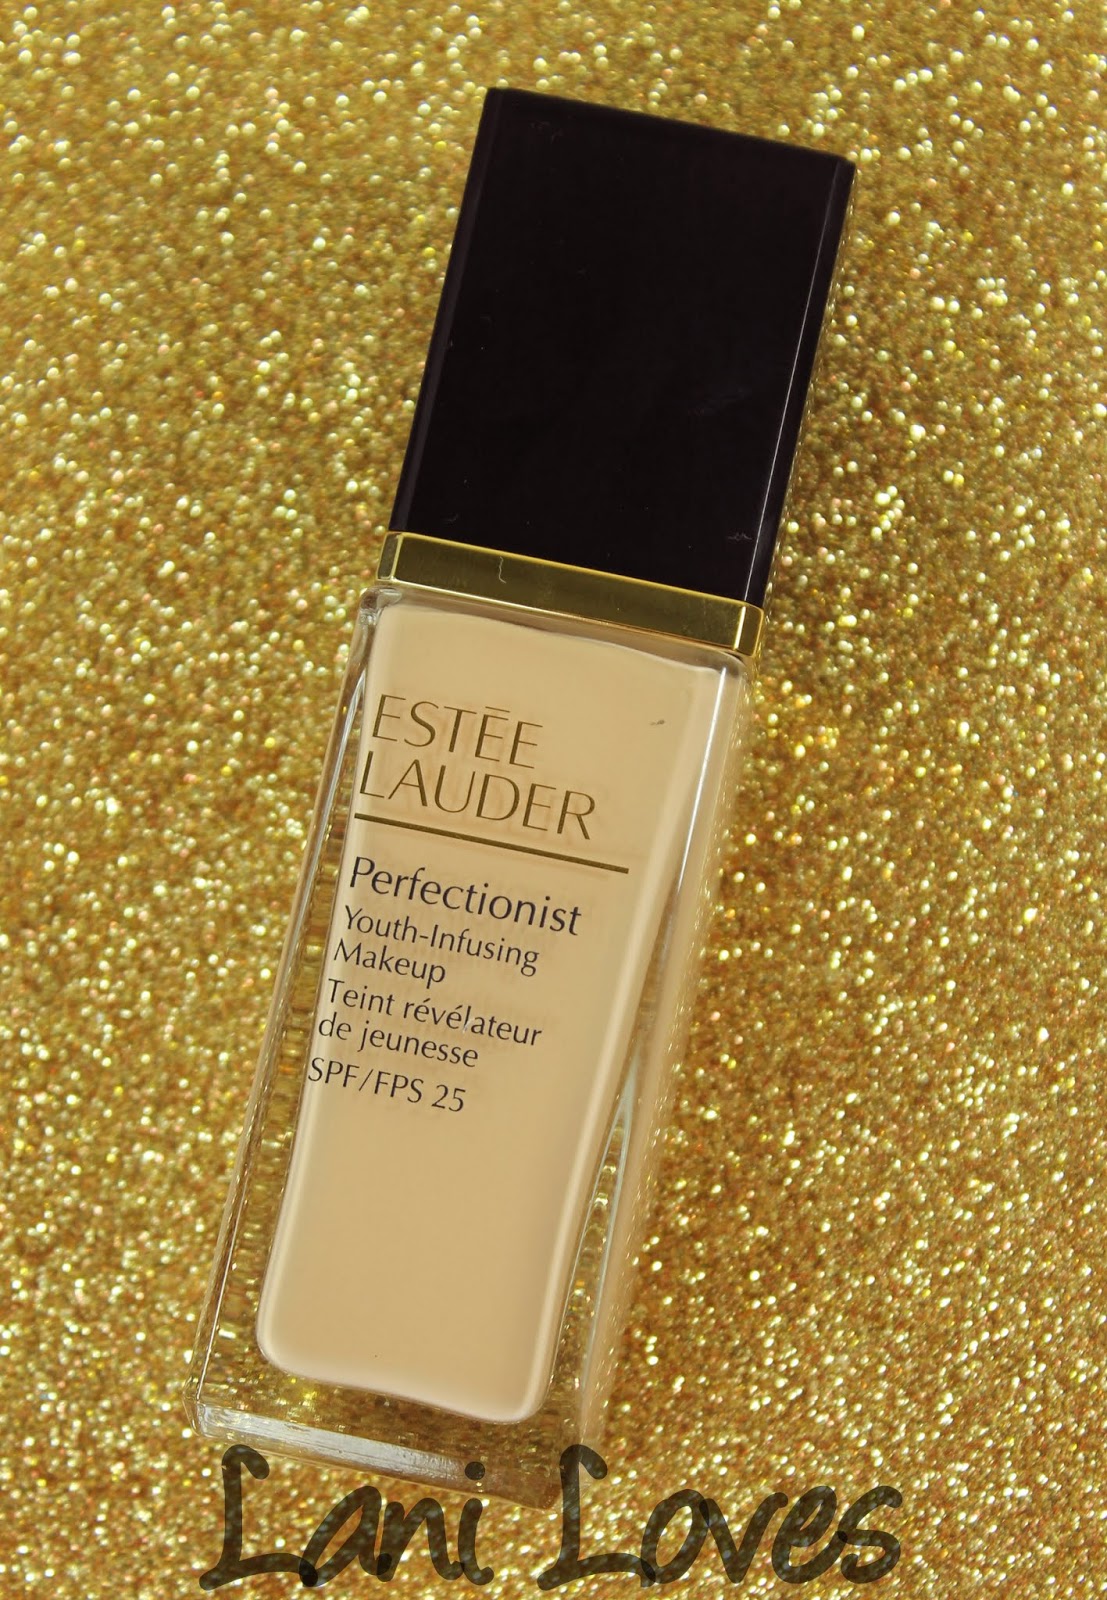 Estee Lauder Perfectionist Youth-Infusing Makeup - 1C1 Cool Bone Swatches & Review